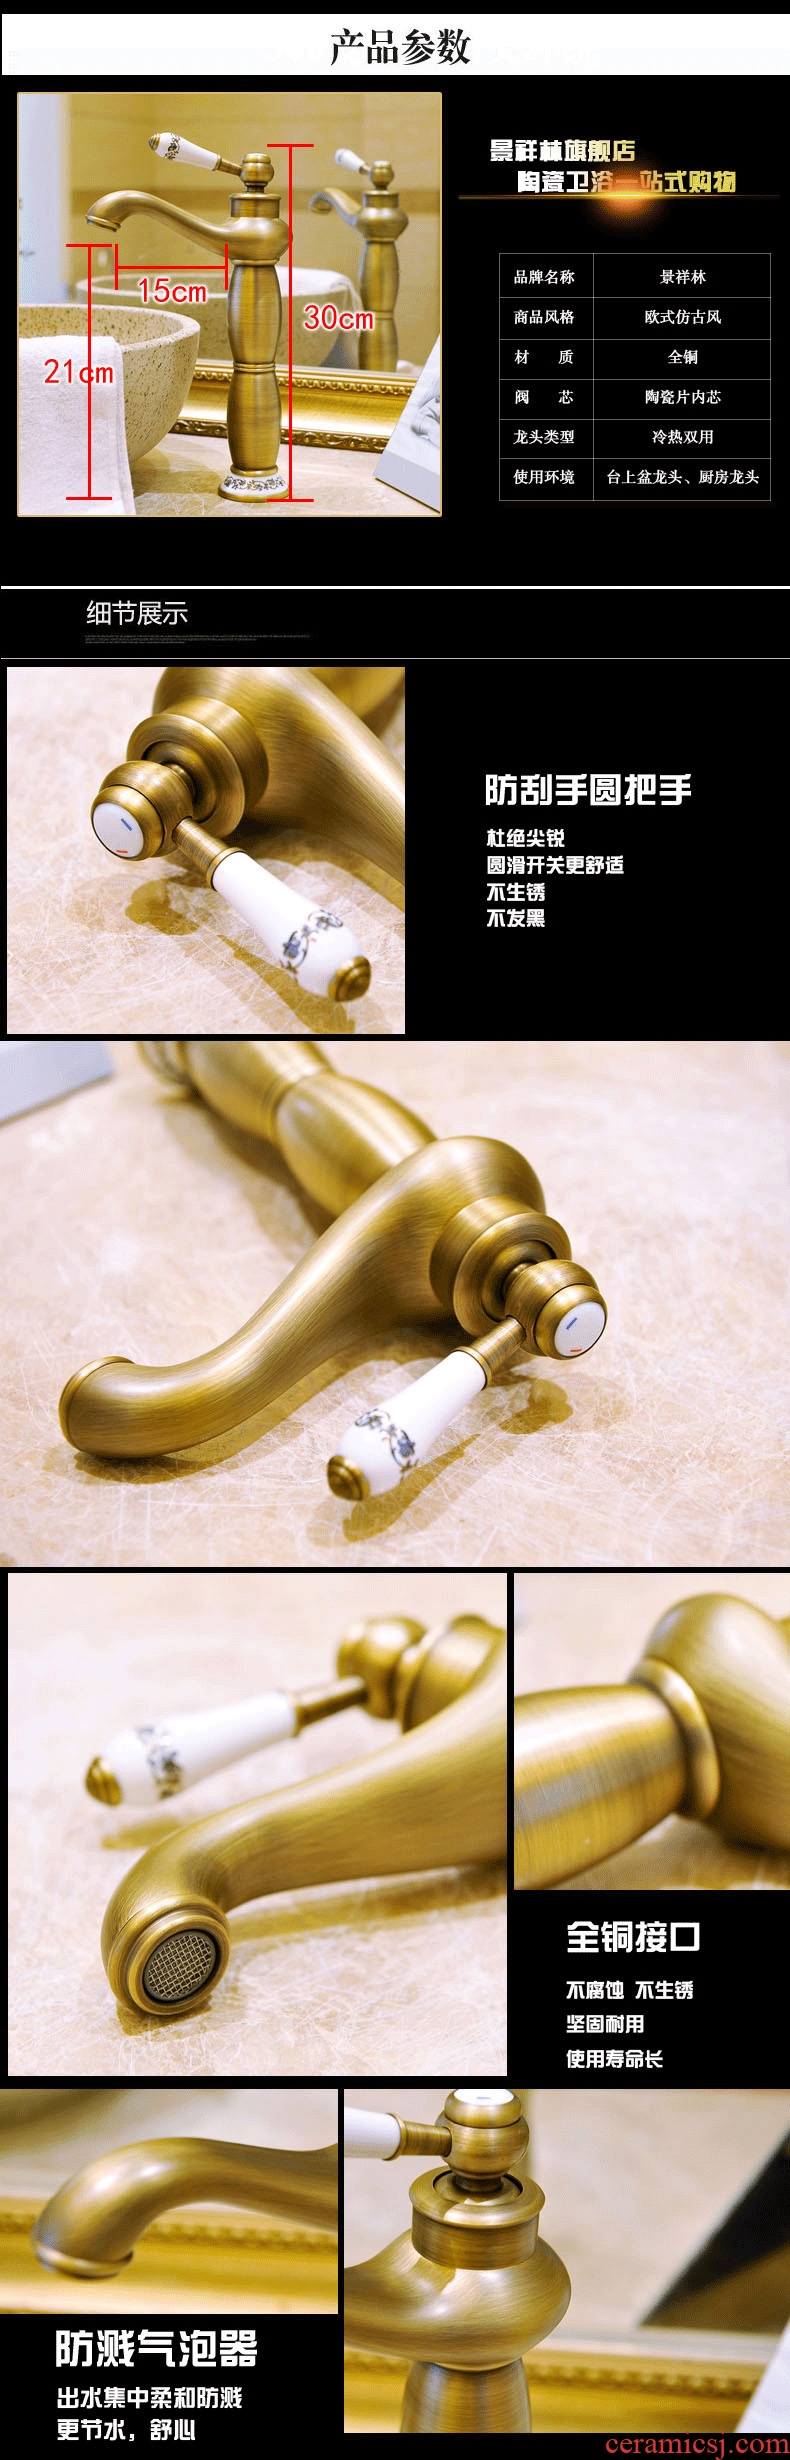 Ou all copper leading ceramic hand turn the faucet on stage basin golden copper tap - 6605 - a